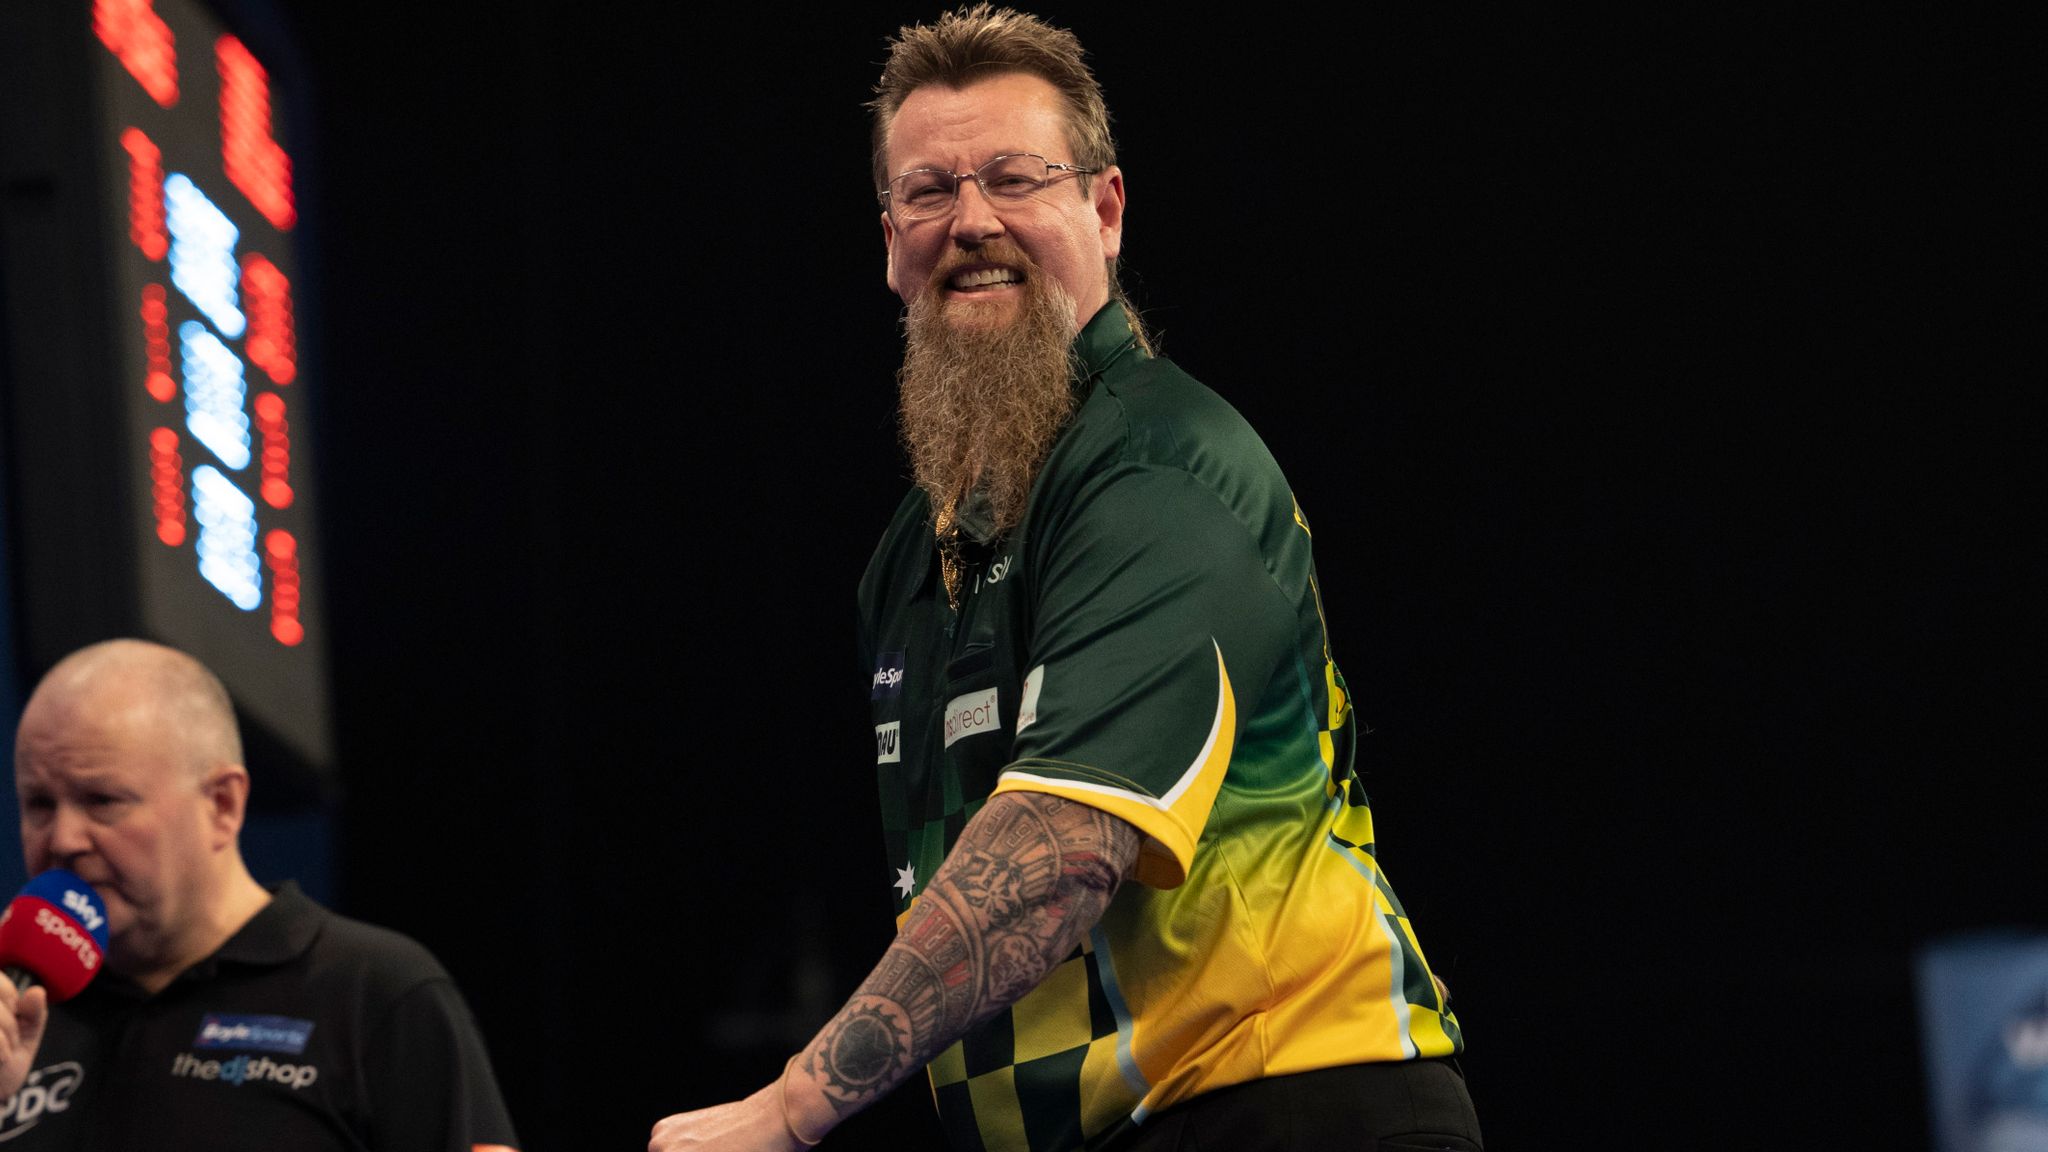 Grand Slam Of Darts 2020 Simon Whitlock And Dave Chisnall Among Eight Names To Secure Spot At Tournament Darts News Sky Sports